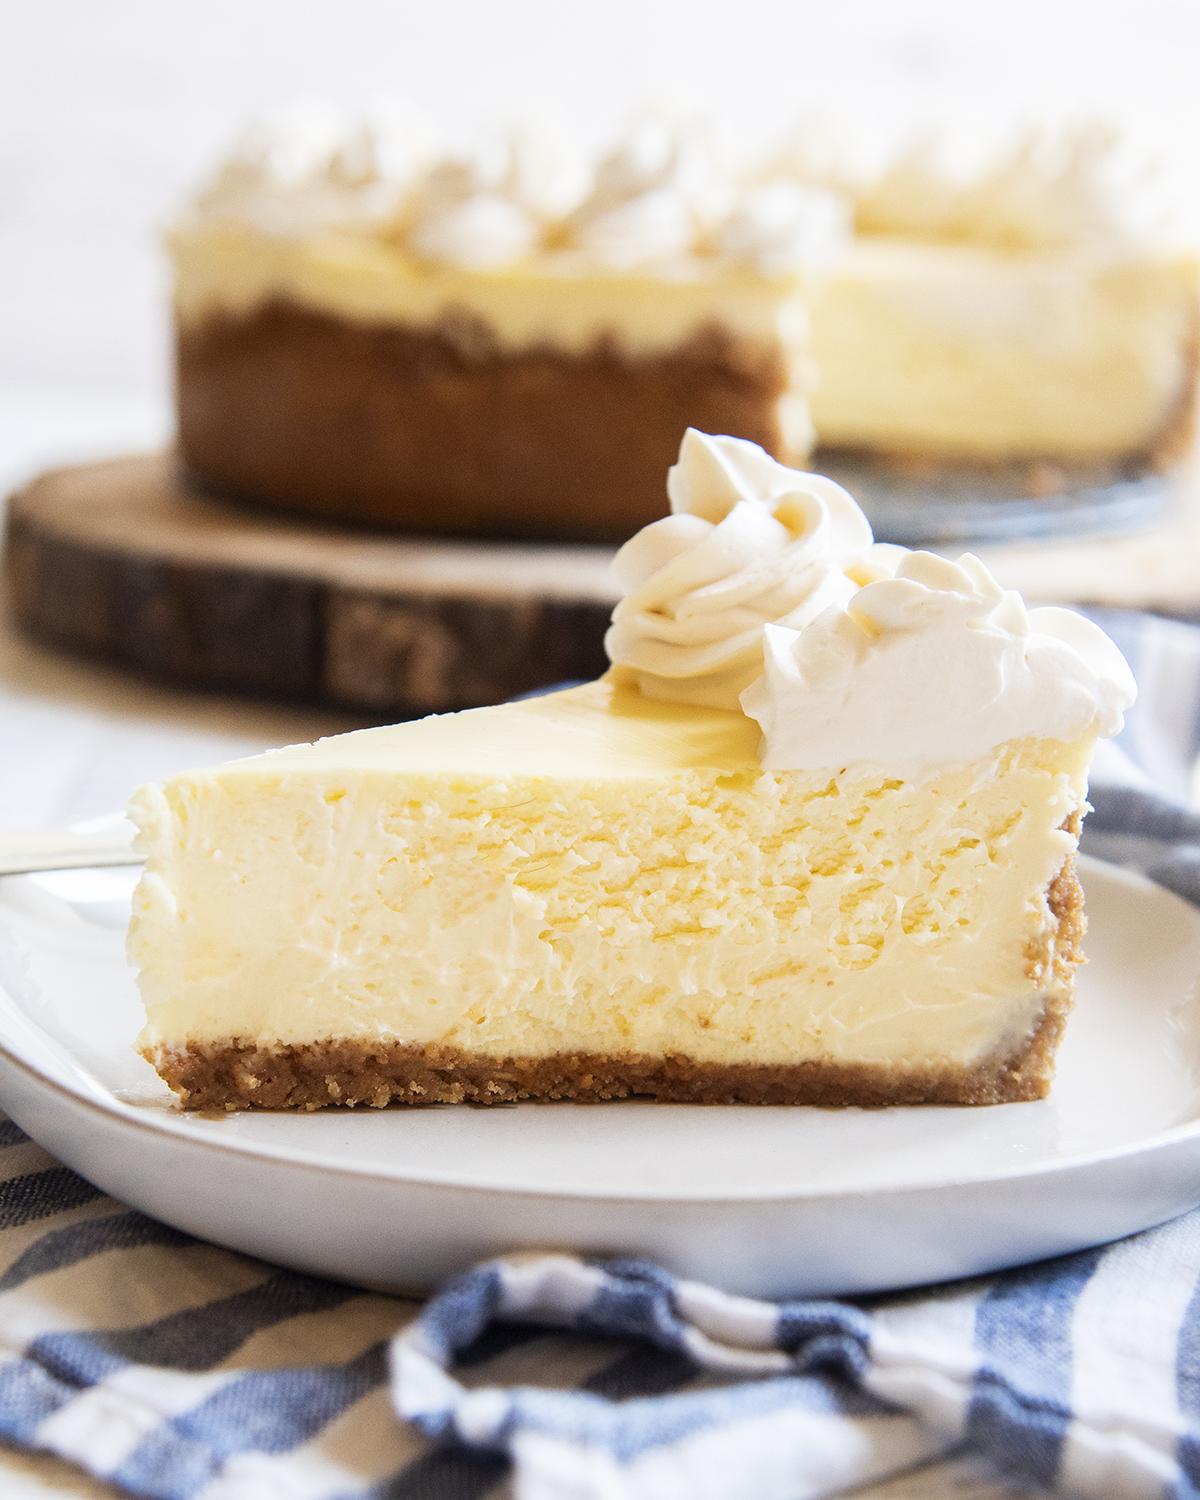 A side view of a slice of cheesecake showing the crust, thick cheesecake, and whipped cream on top.